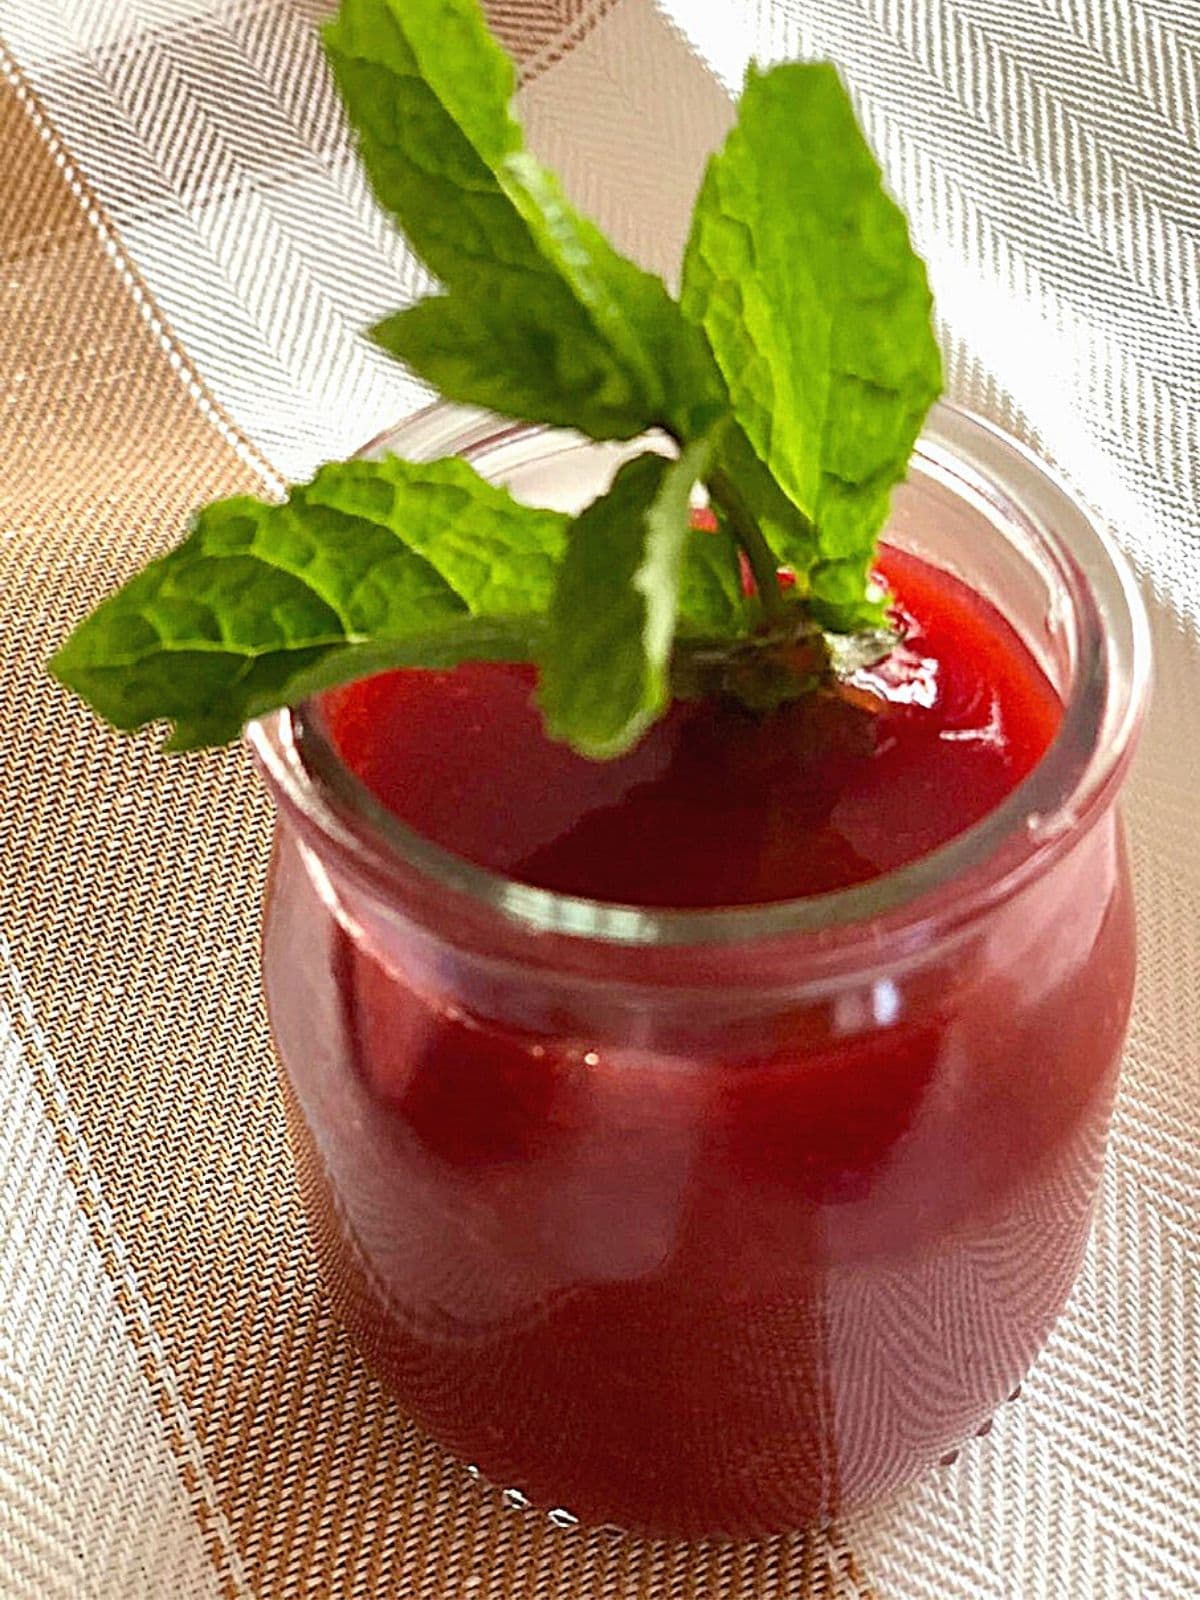 Strawberry coulis in a small glass jar with a sprig of mint.